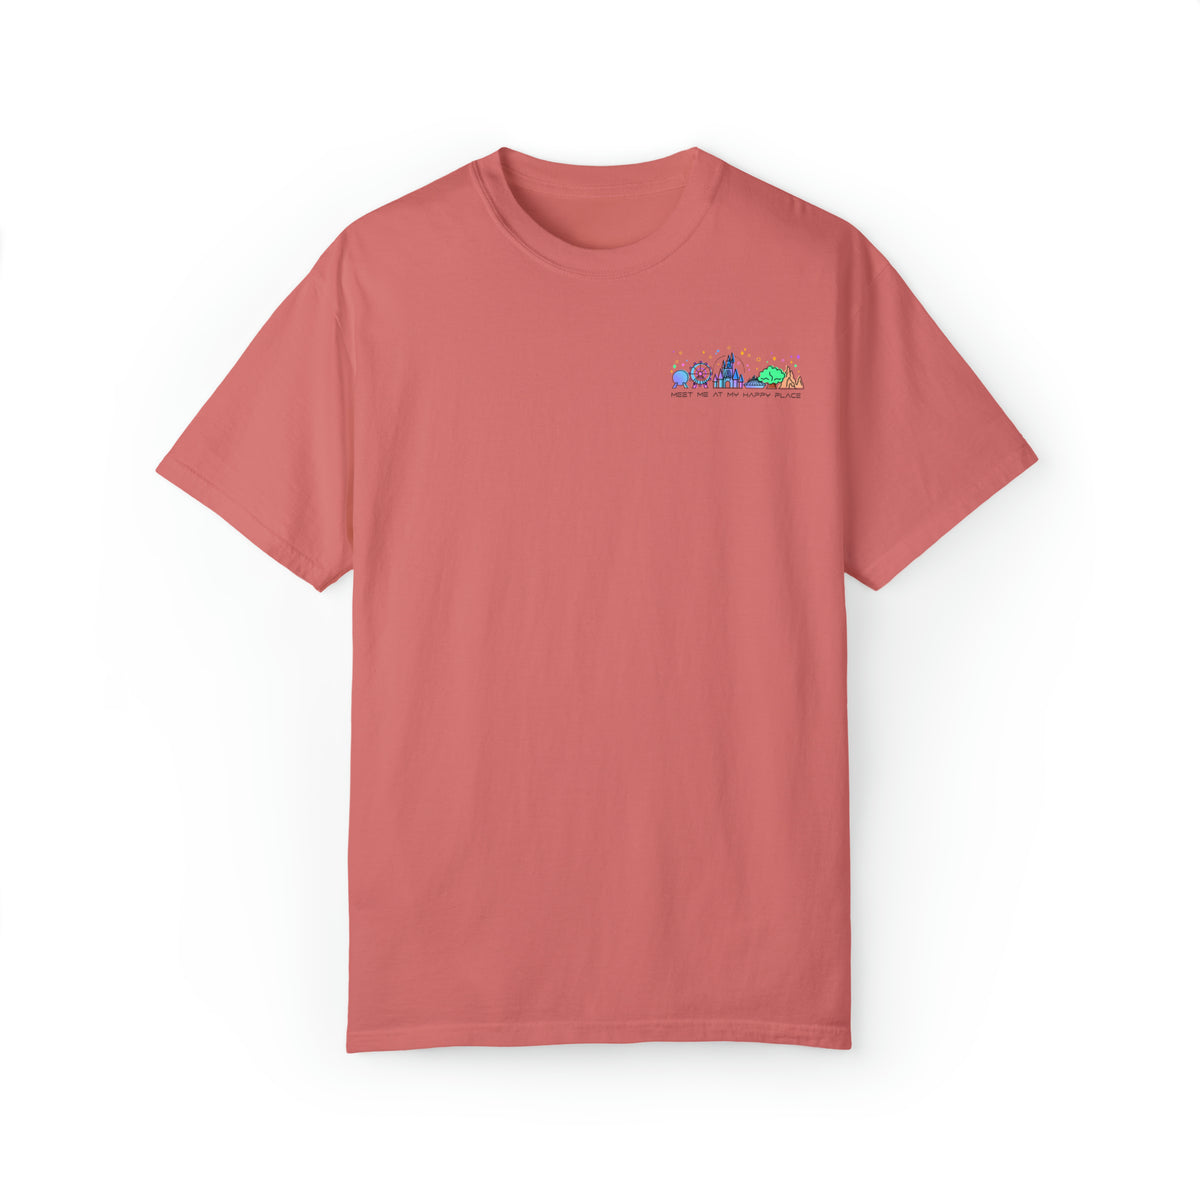 Meet Me At My Happy Place Comfort Colors Unisex Garment-Dyed T-shirt